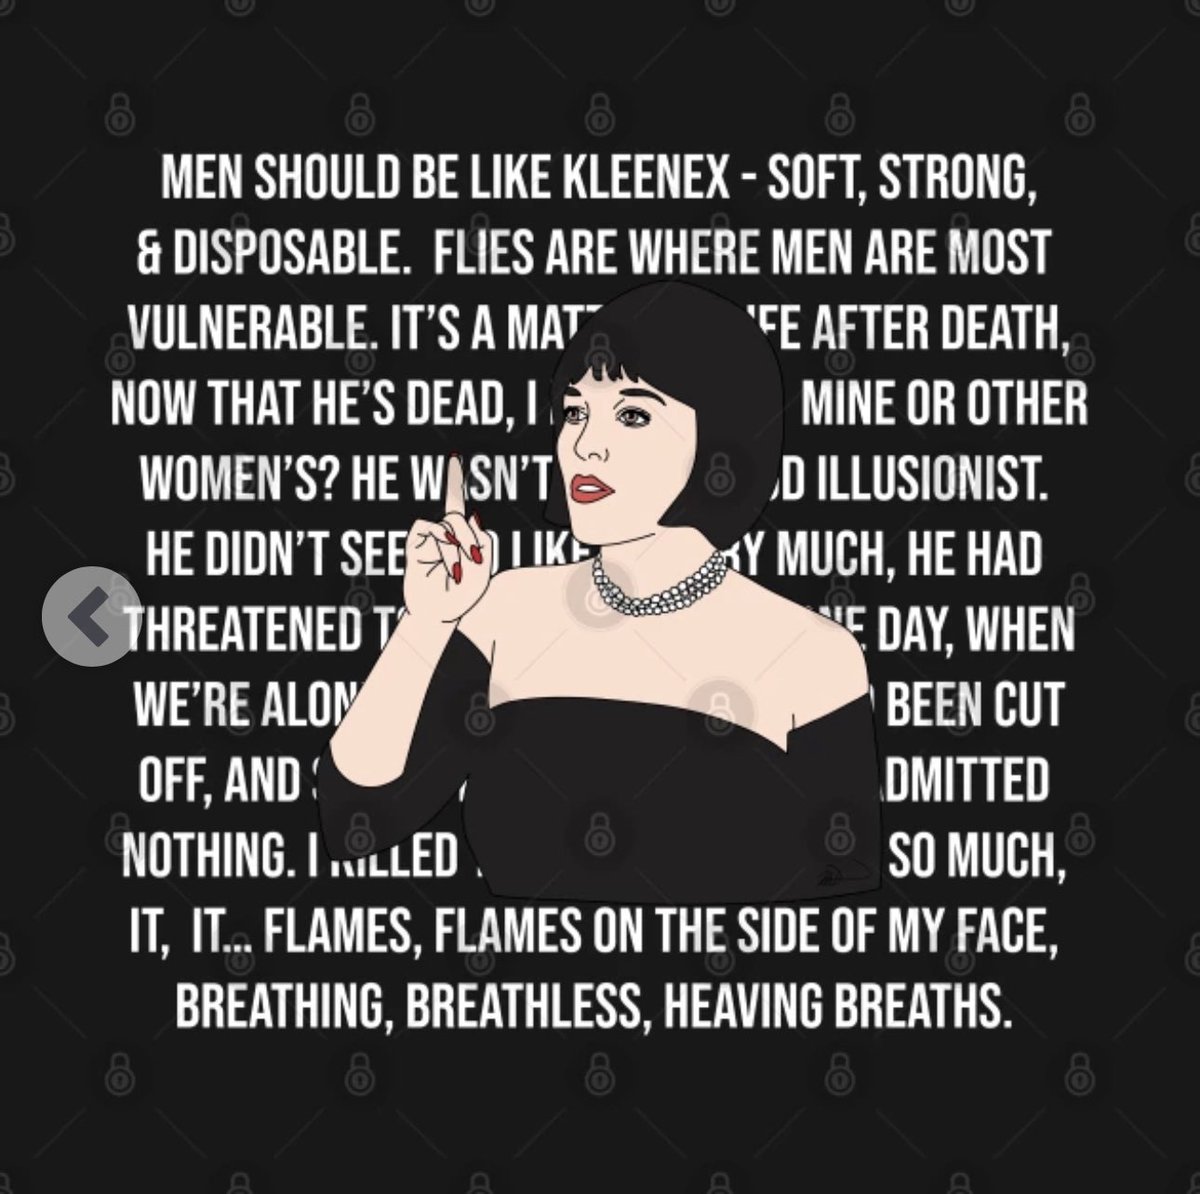 One of the best The Compass Rose designs: The Mrs. White wall of quotes.  teepublic.com/t-shirt/273313… #CompassRose #Clue #ClueMovie #ClueTheMovie #ClueDocumentary #CluePodcast #MrsWhite #MadelineKahn #flamesonthesideofmyface